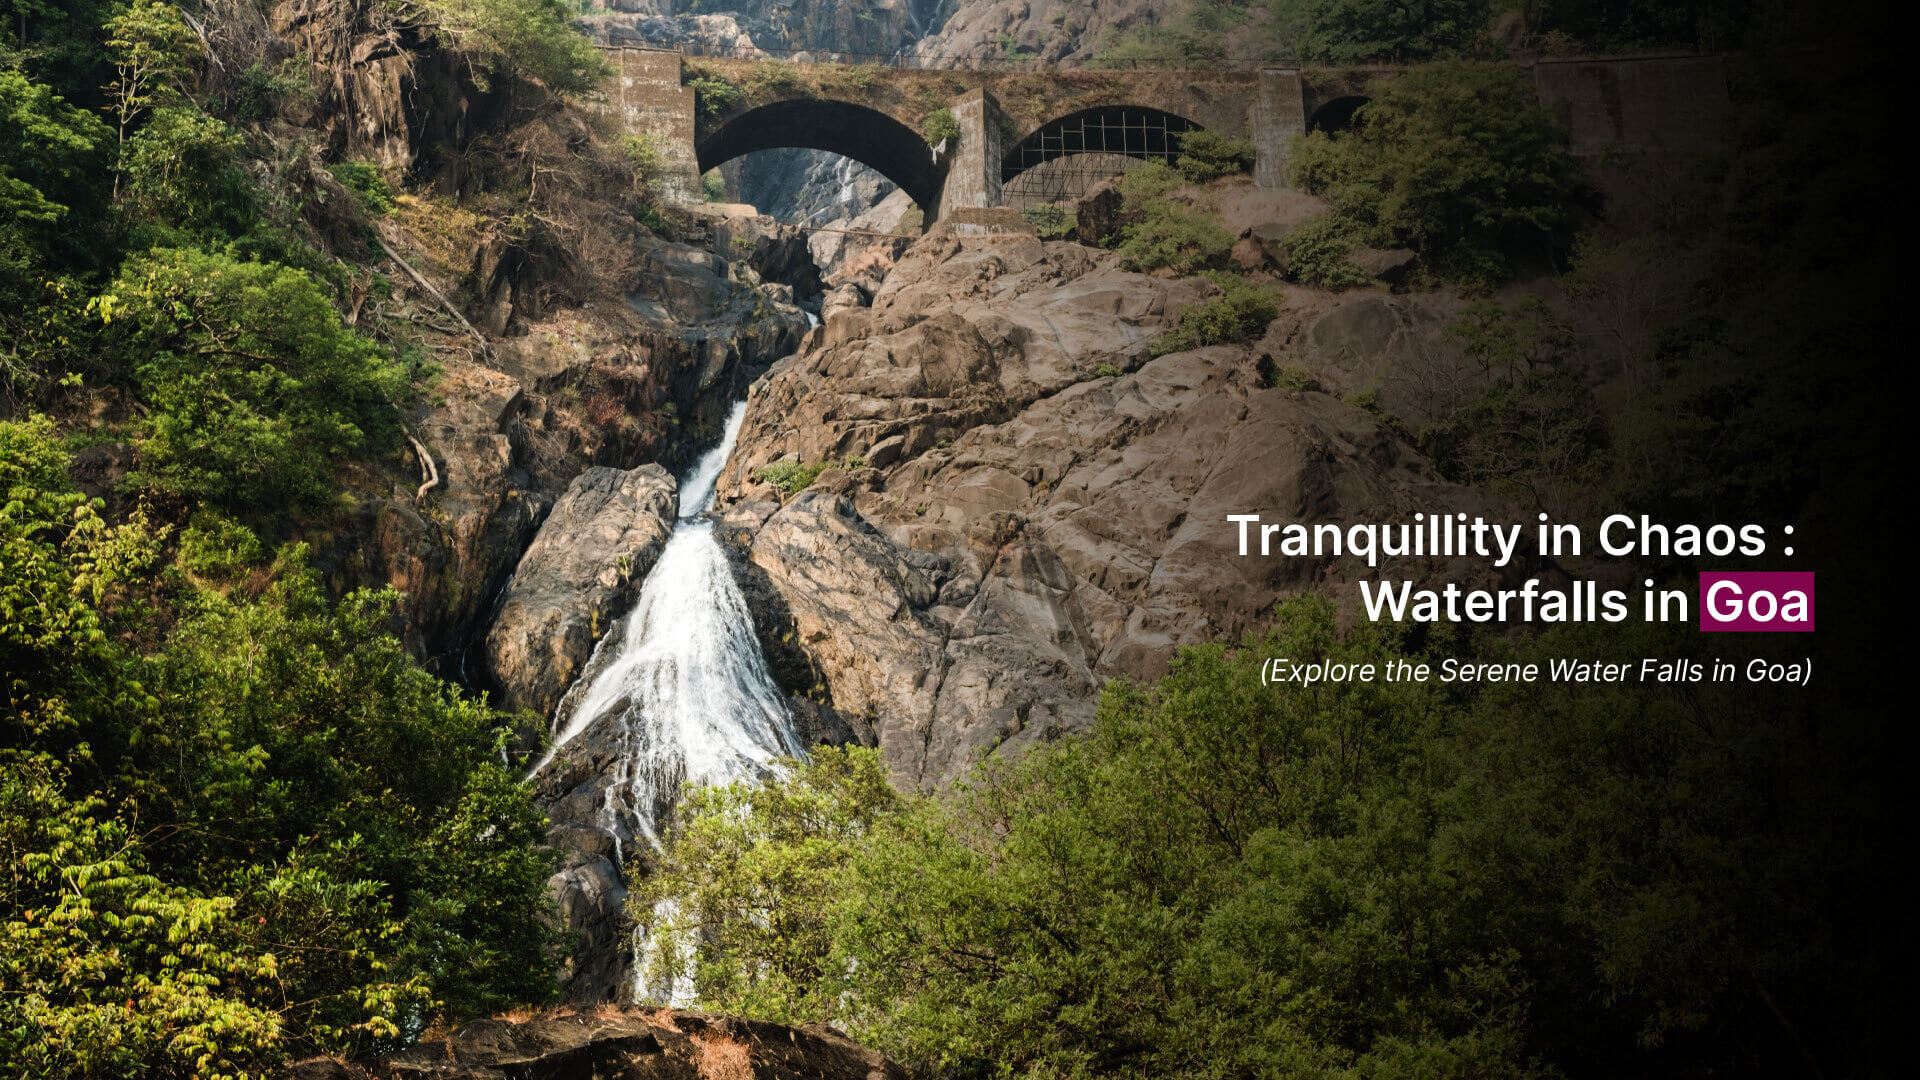 Tranquillity in Chaos: Waterfalls in Goa